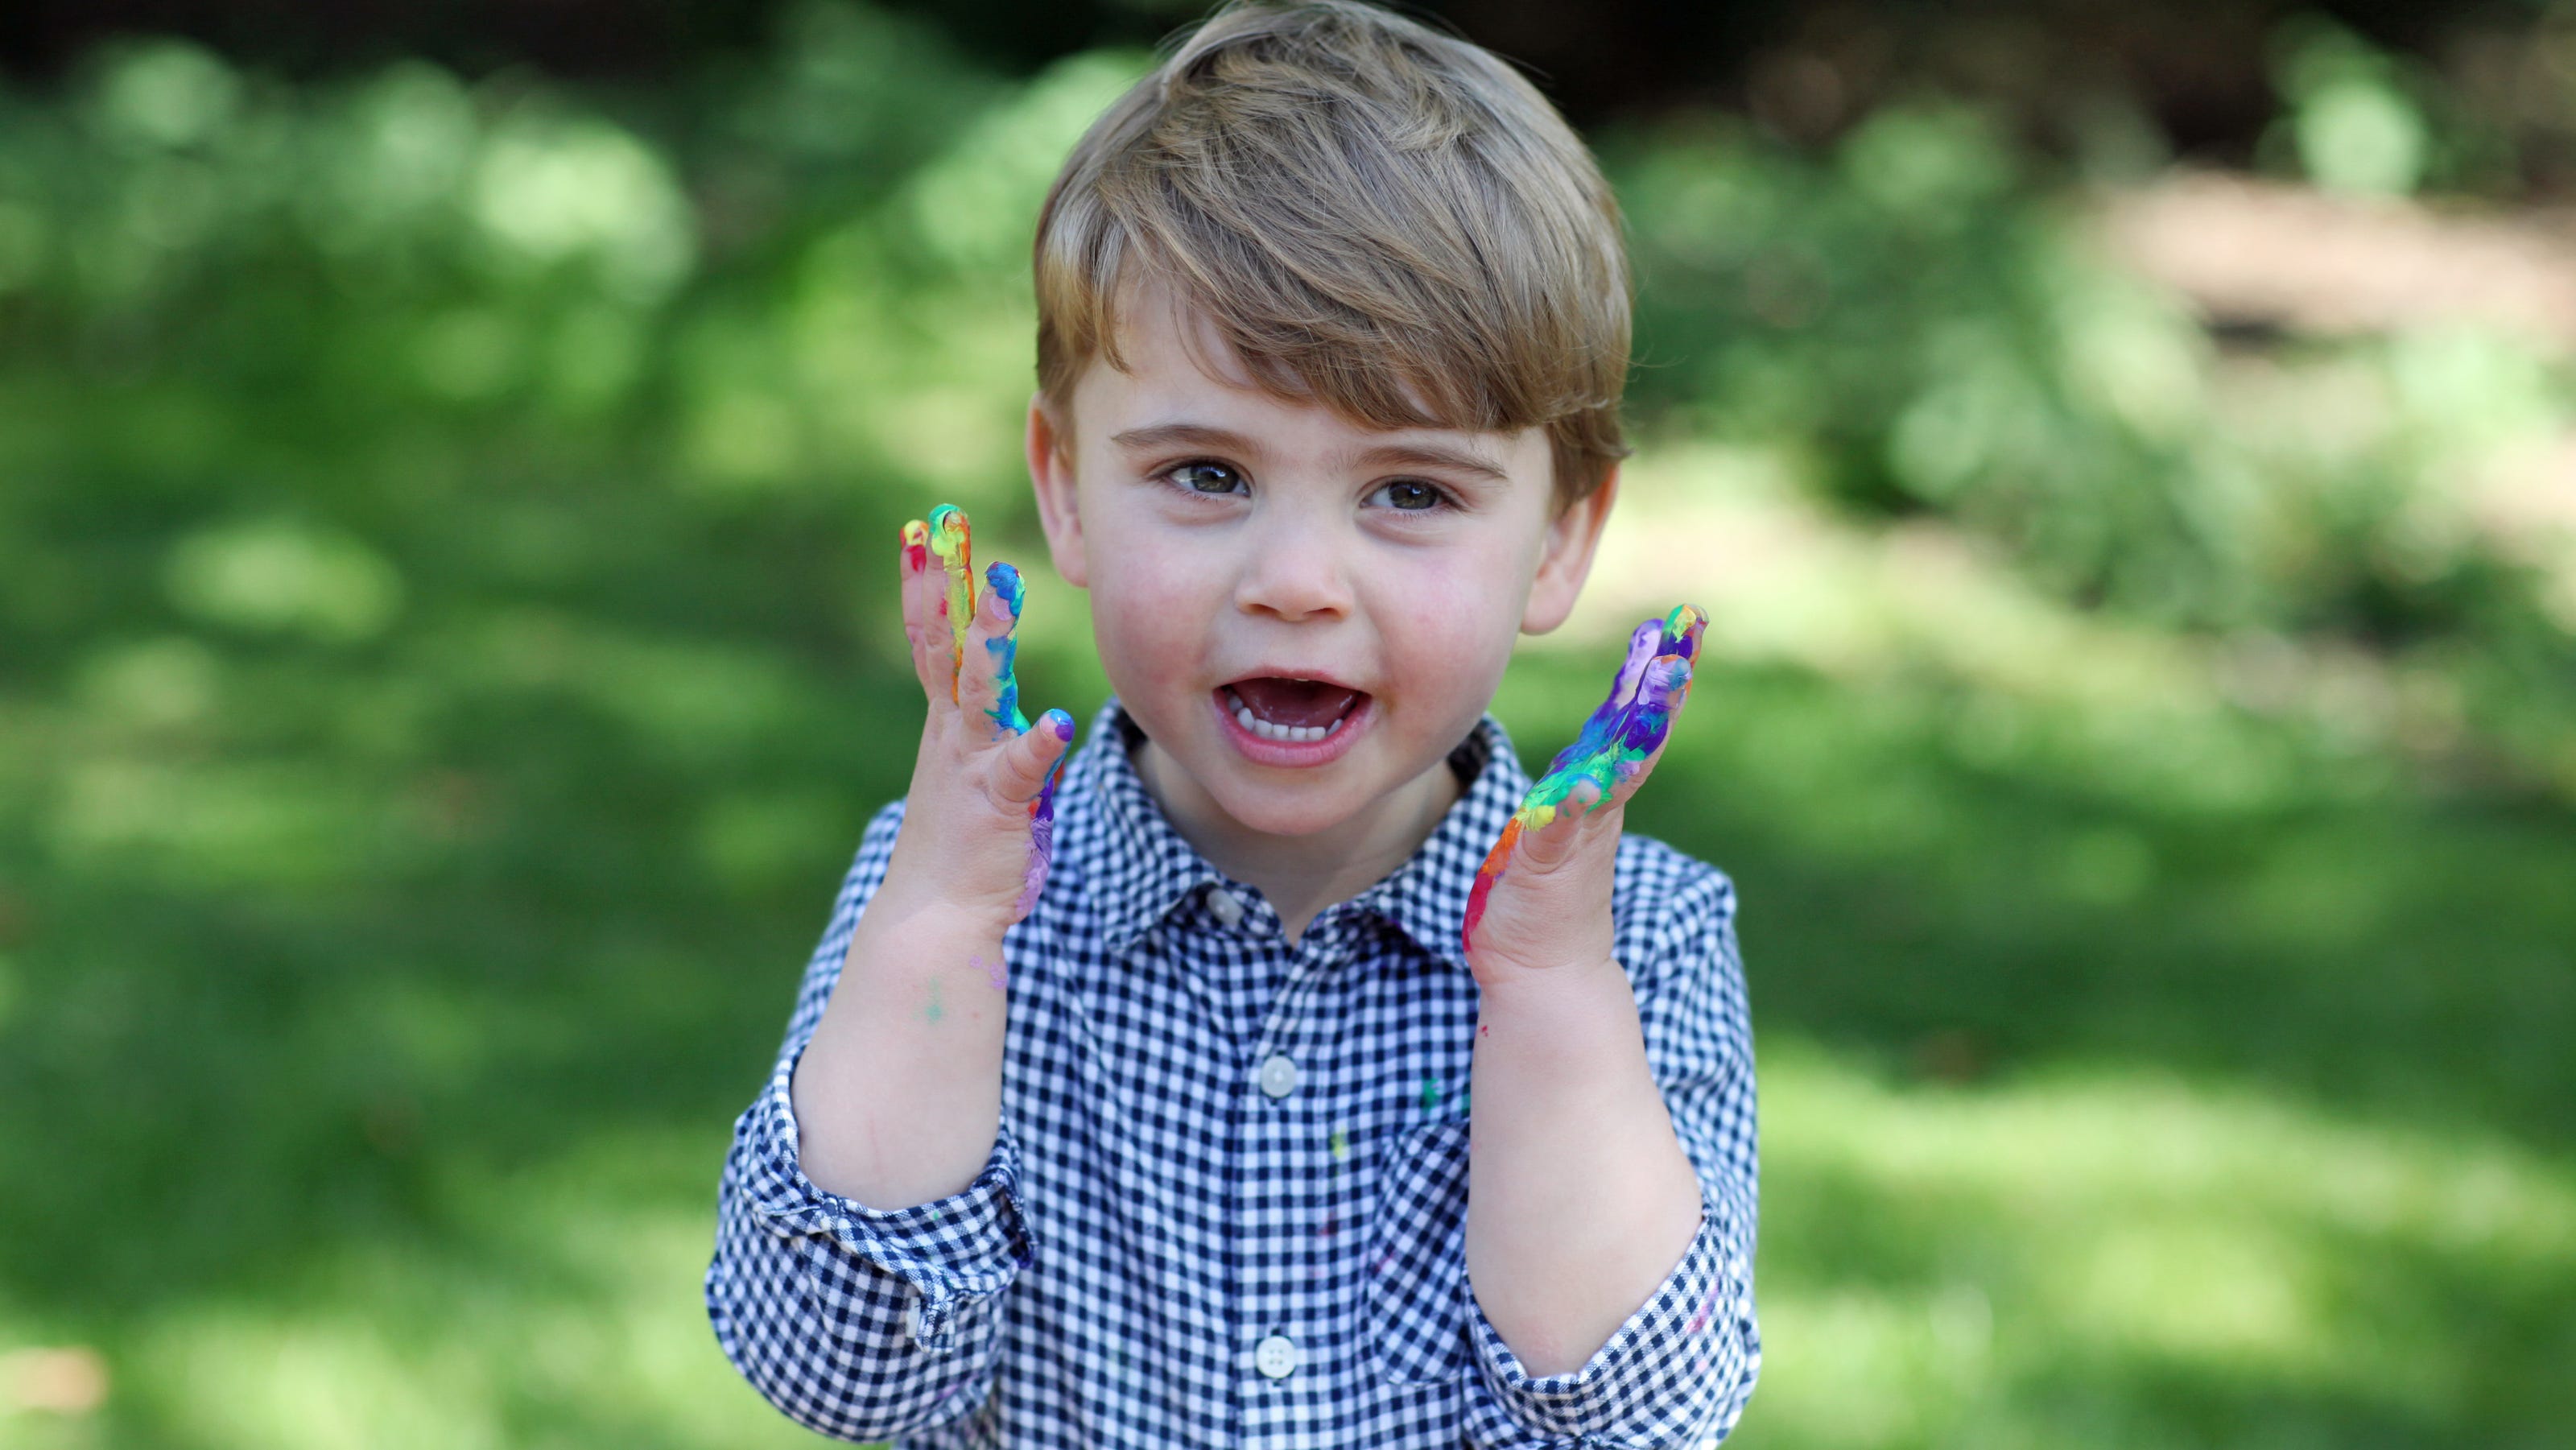 Photos: Happy birthday, Prince Louis! Youngest royal Cambridge turns 2